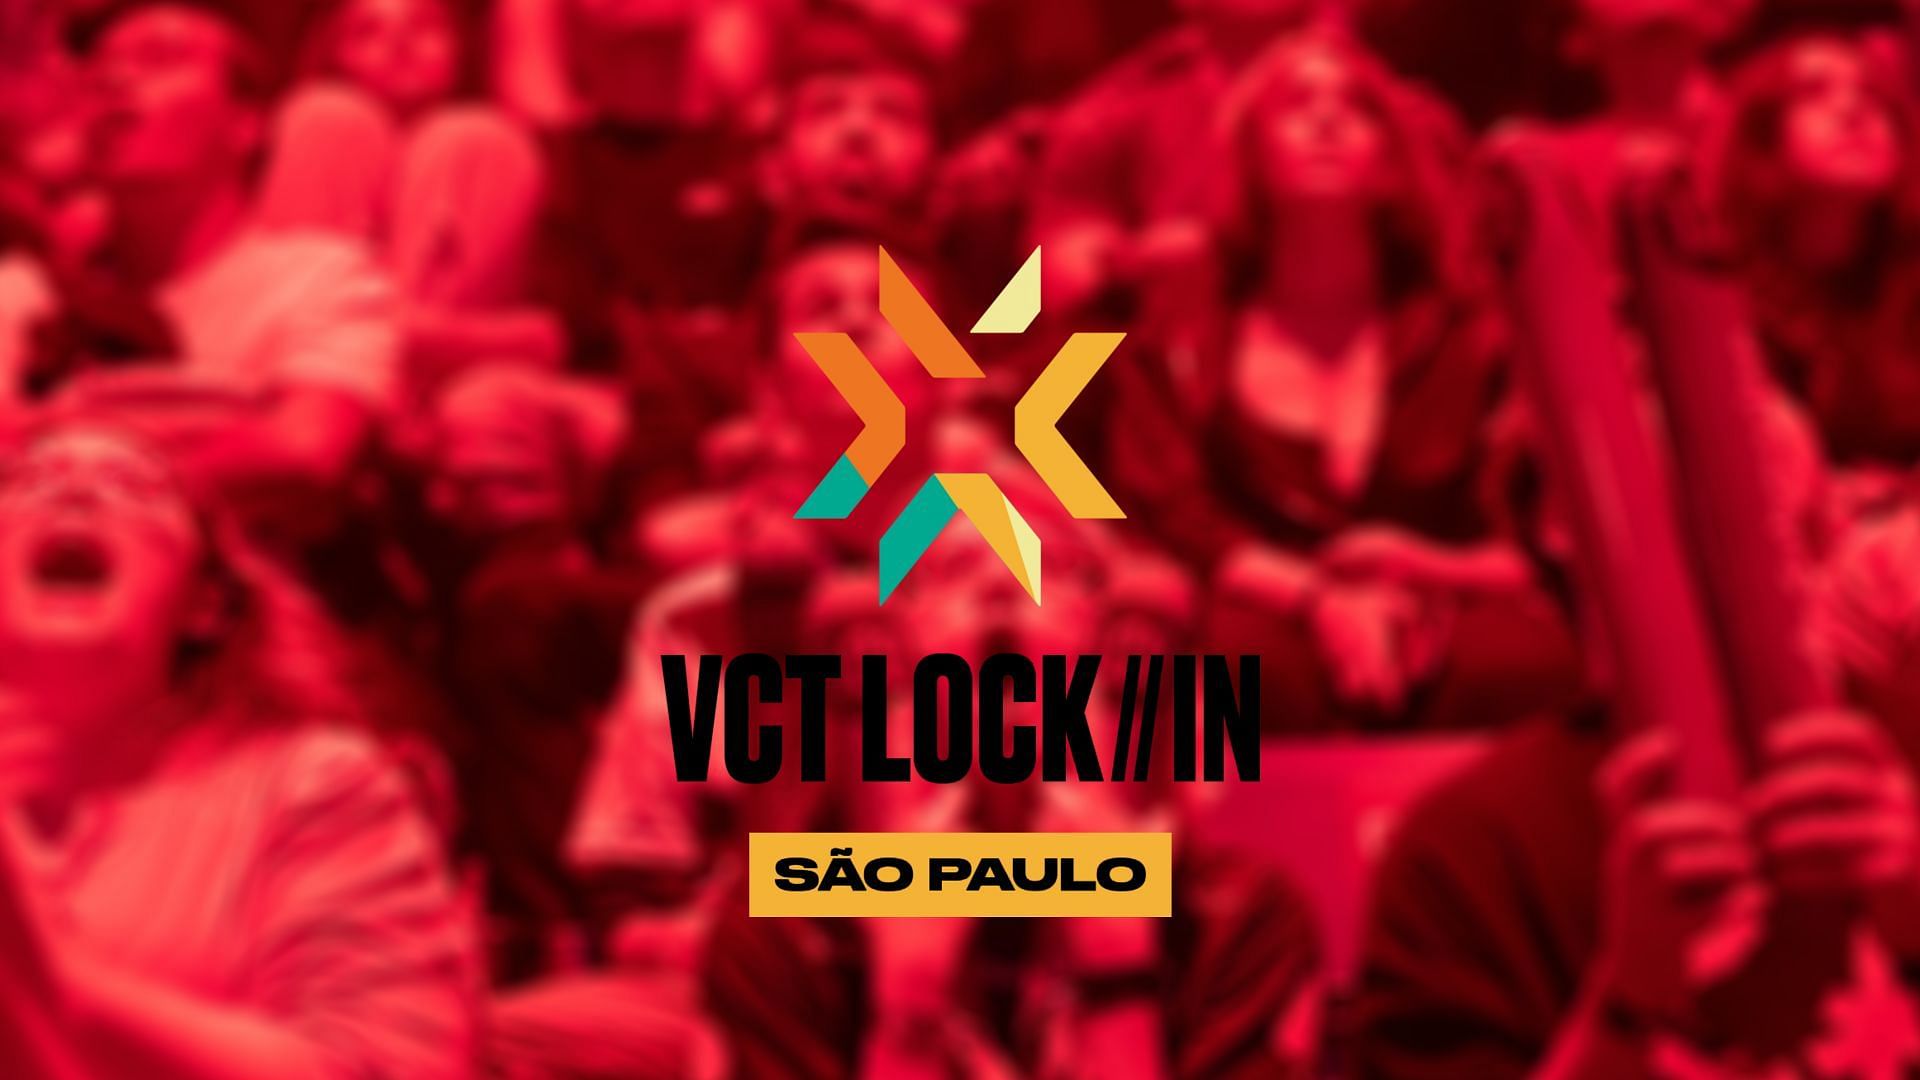 VCT Lock In São Paulo: Pros question punishing format